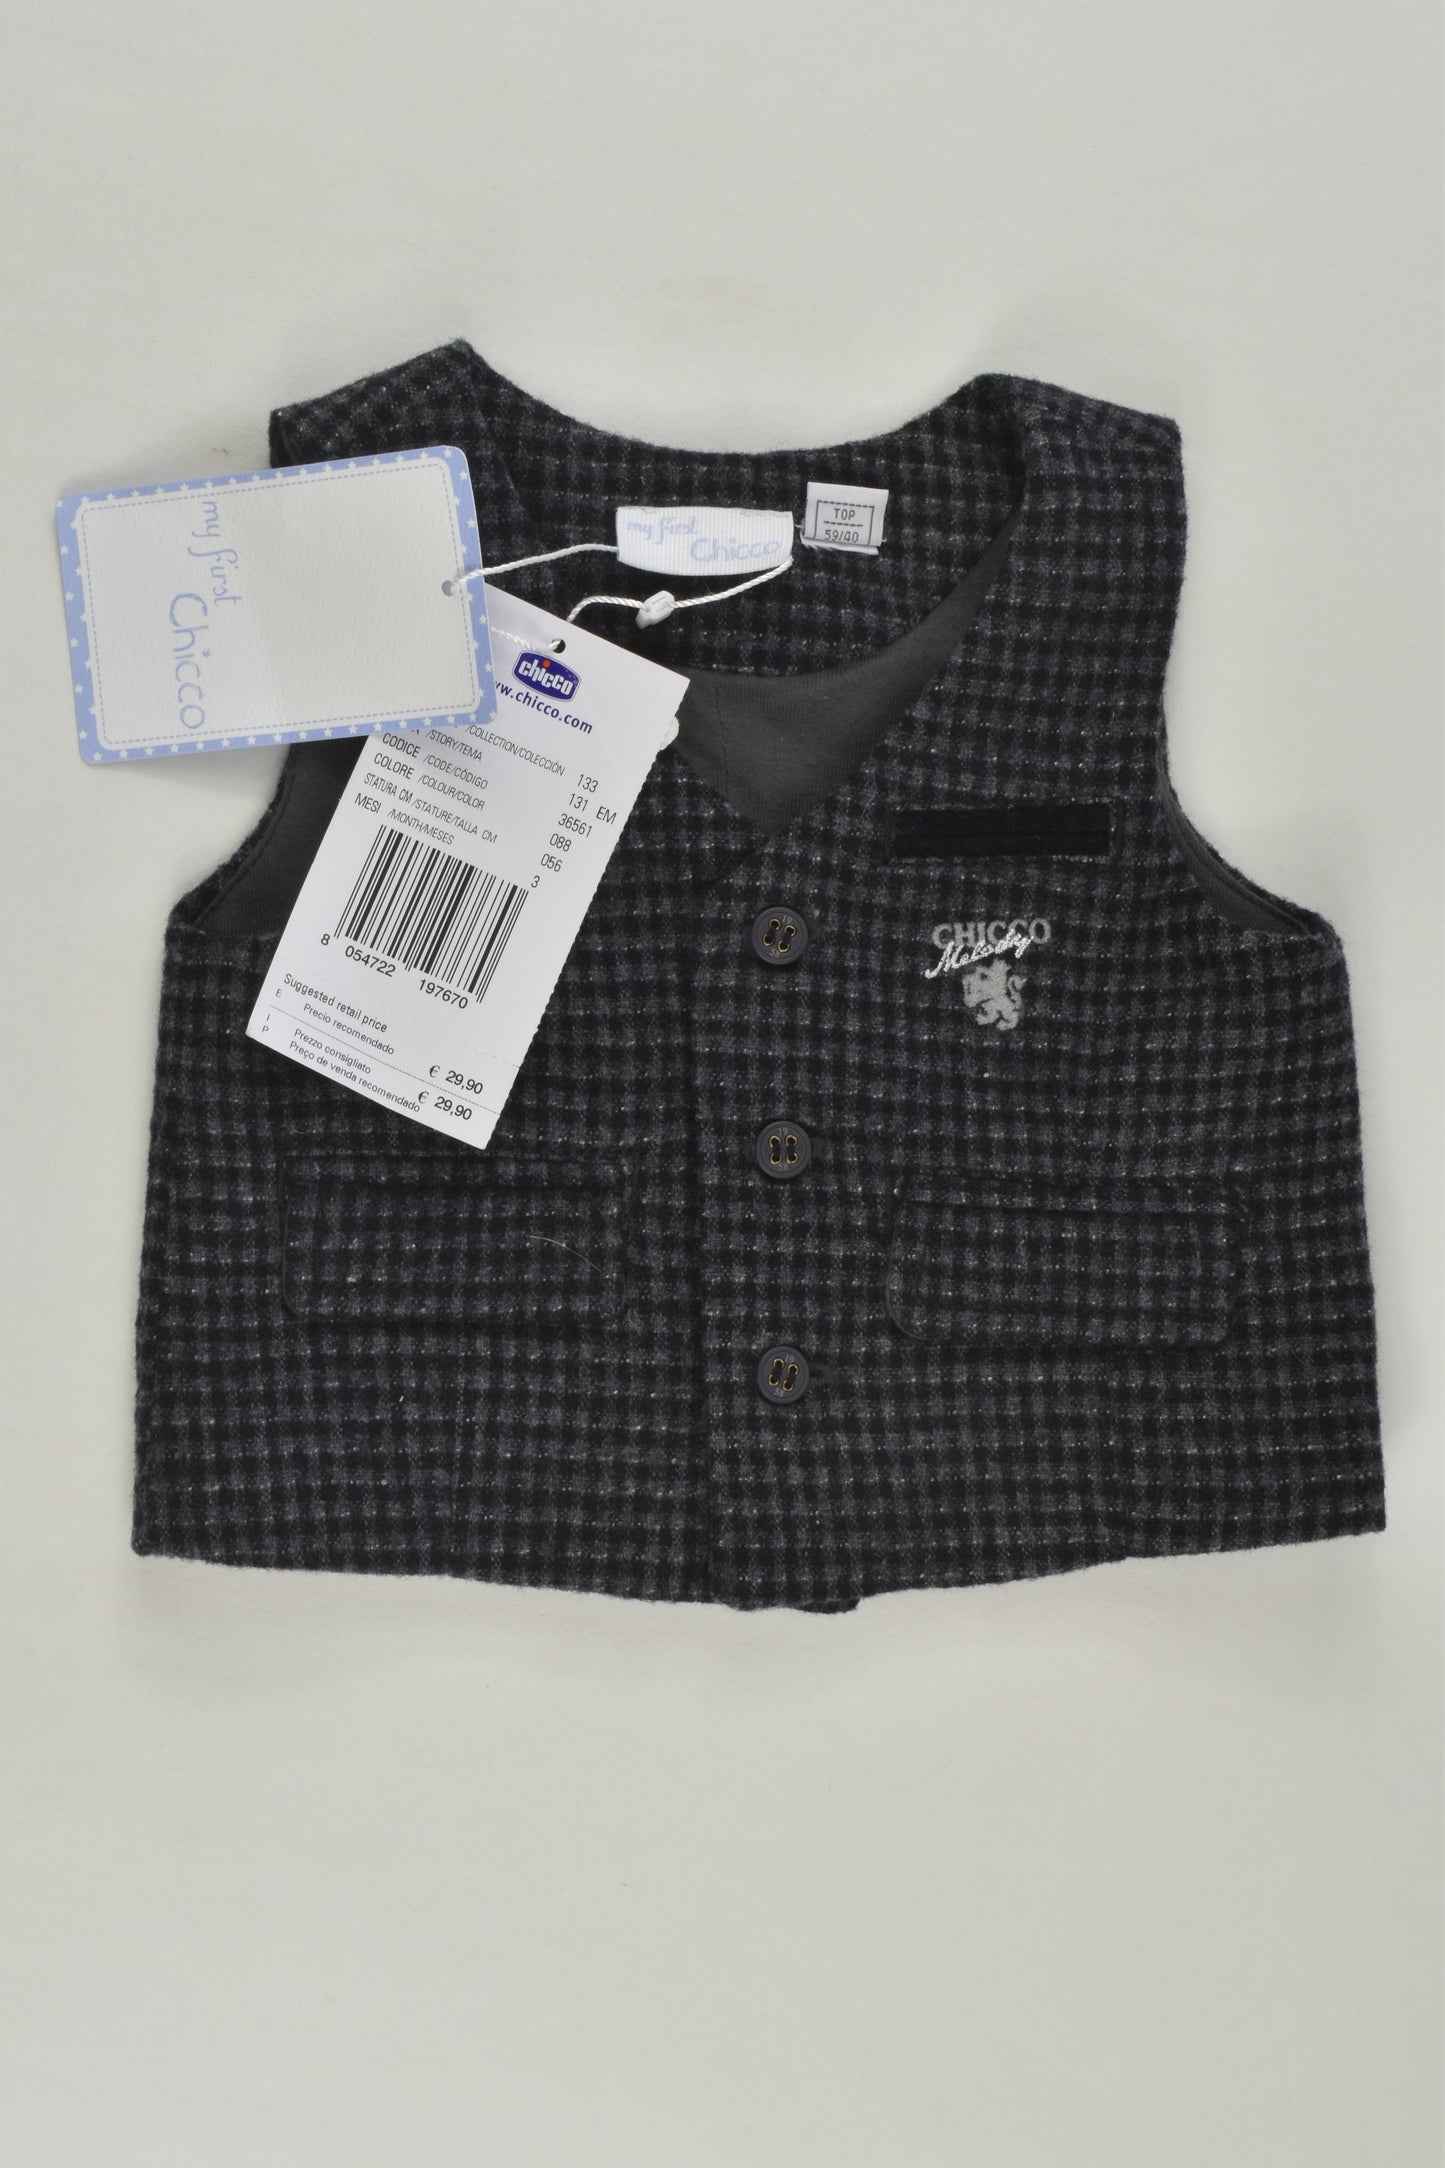 NEW My First Chicco Size 000 (56 cm, 3 months) Vest